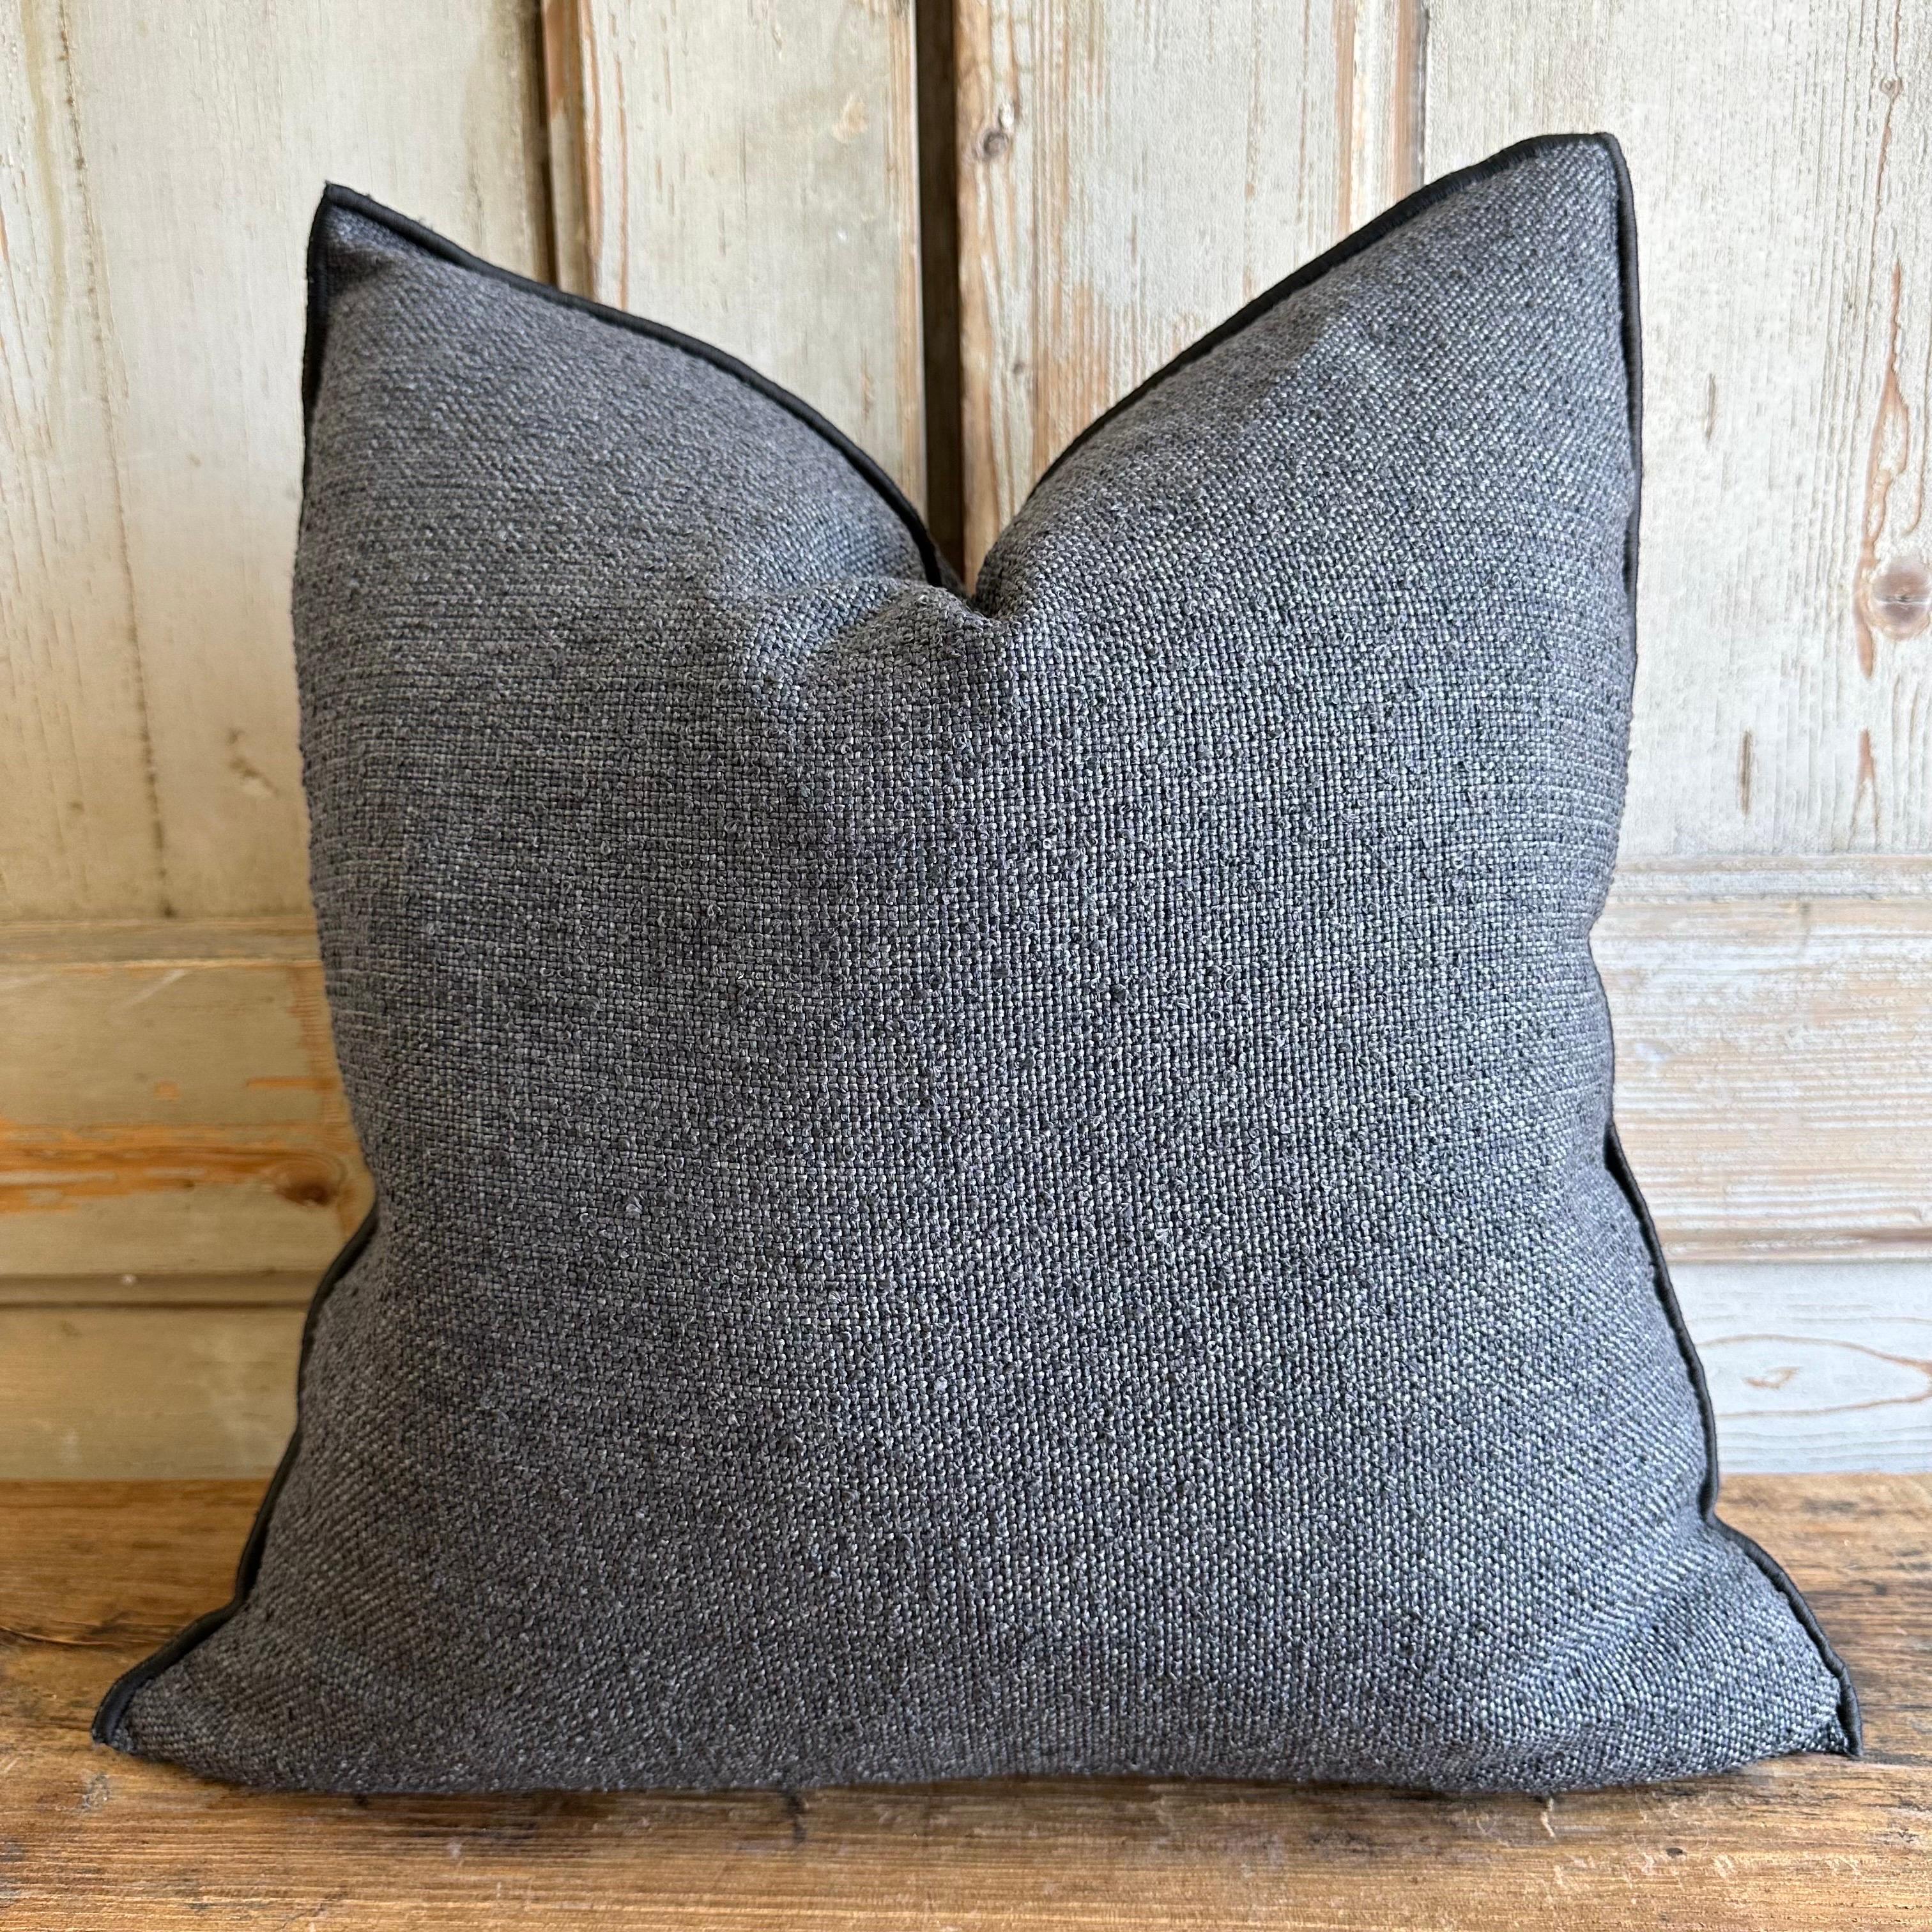 Welcome to bloomhomeinc we stock over 2000 items, please scroll down and click view sellers other items to see more!

Outdoor safe pillows in a natural textured linen fabric.
Size: 20x20
Color: Charbon (a dark charcoal gray)
-Zipper closure
-Custom